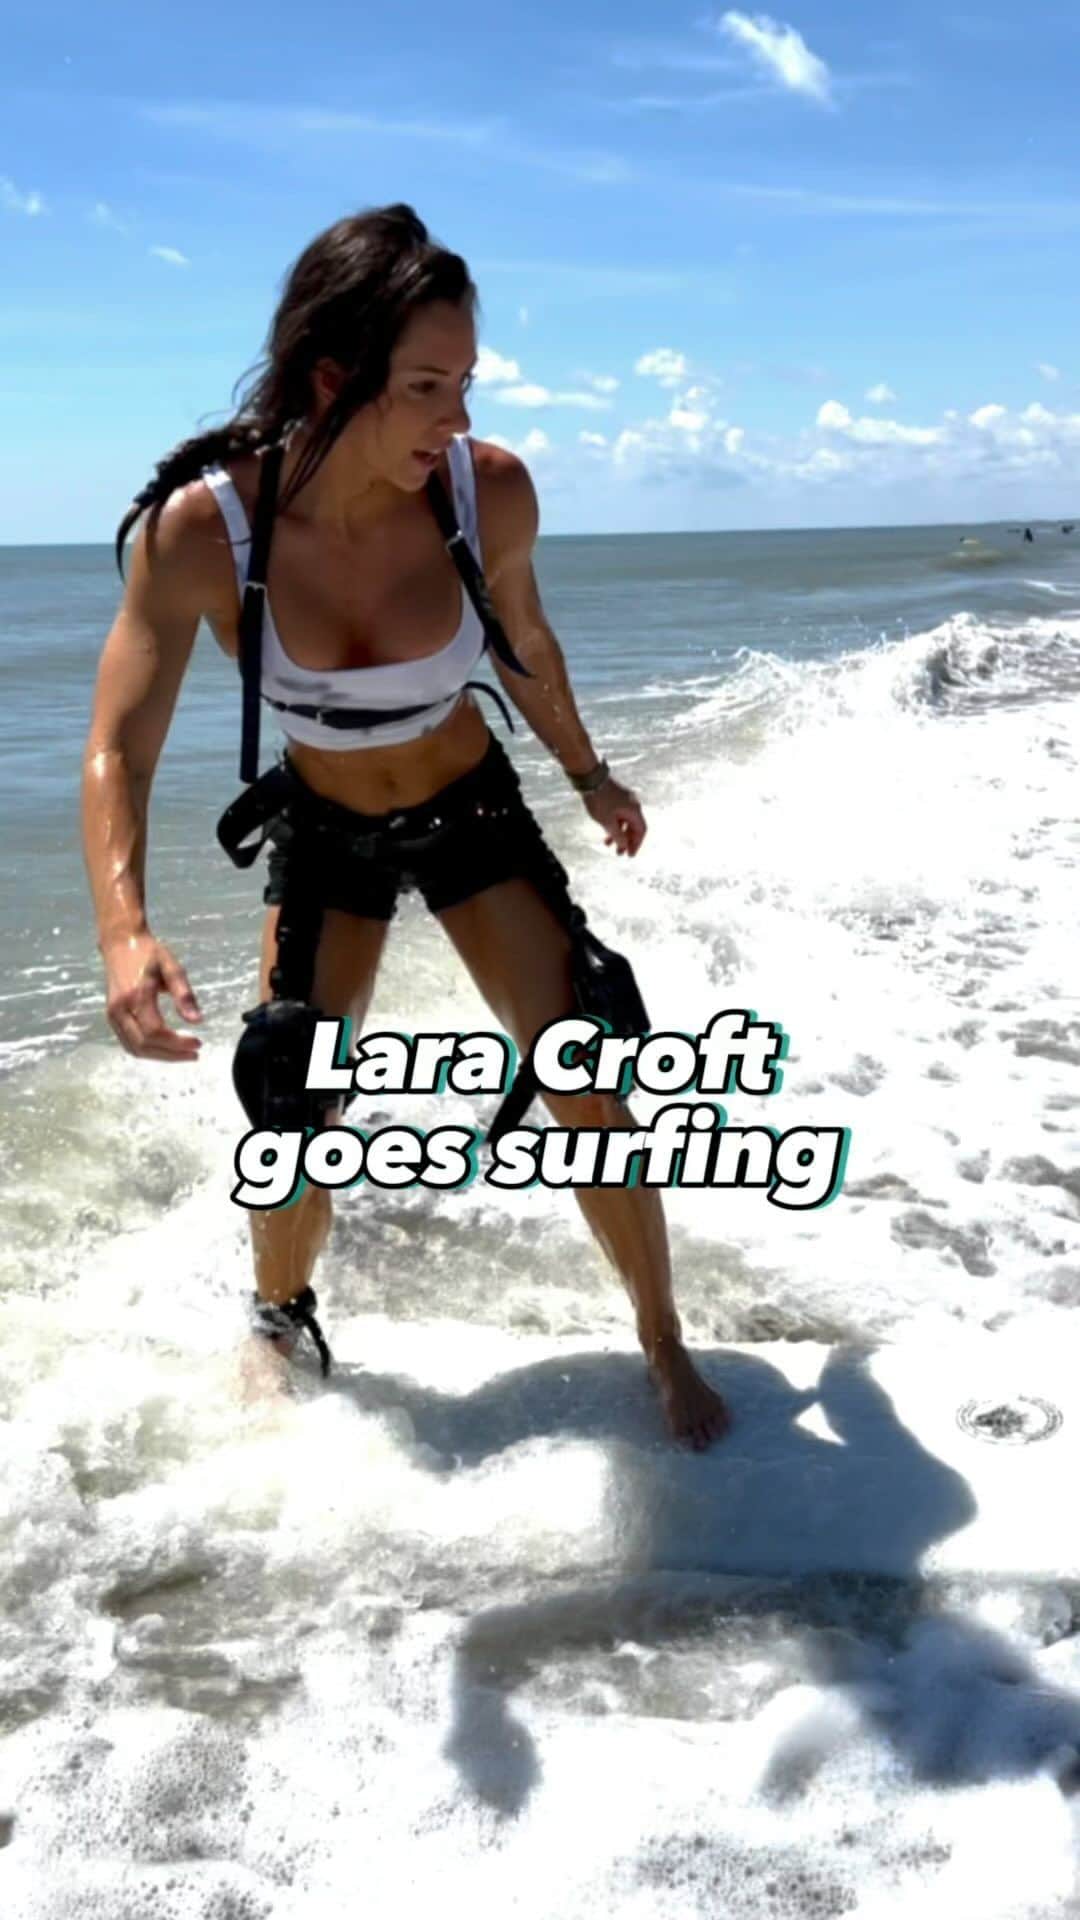 Janna Breslinのインスタグラム：「Mission: GTFOutside.  Status: Accomplished!  Embracing my inner Lara Croft… and let’s just say, it’s been a journey of unshakable determination and epic wipeouts 🤙  Surfing mightn’t come to me naturally (yet!), but who said it’s a matter of getting it right on the first try, right?   I keep reminding myself… it’s not about how many times you fall – it’s about how many times you get back up (the answer to both is many) 😆  What’s something you’re bouncing back from this week? 😈  #GTFOutside #EarnYourFreedom #Surfing #Outdoors」